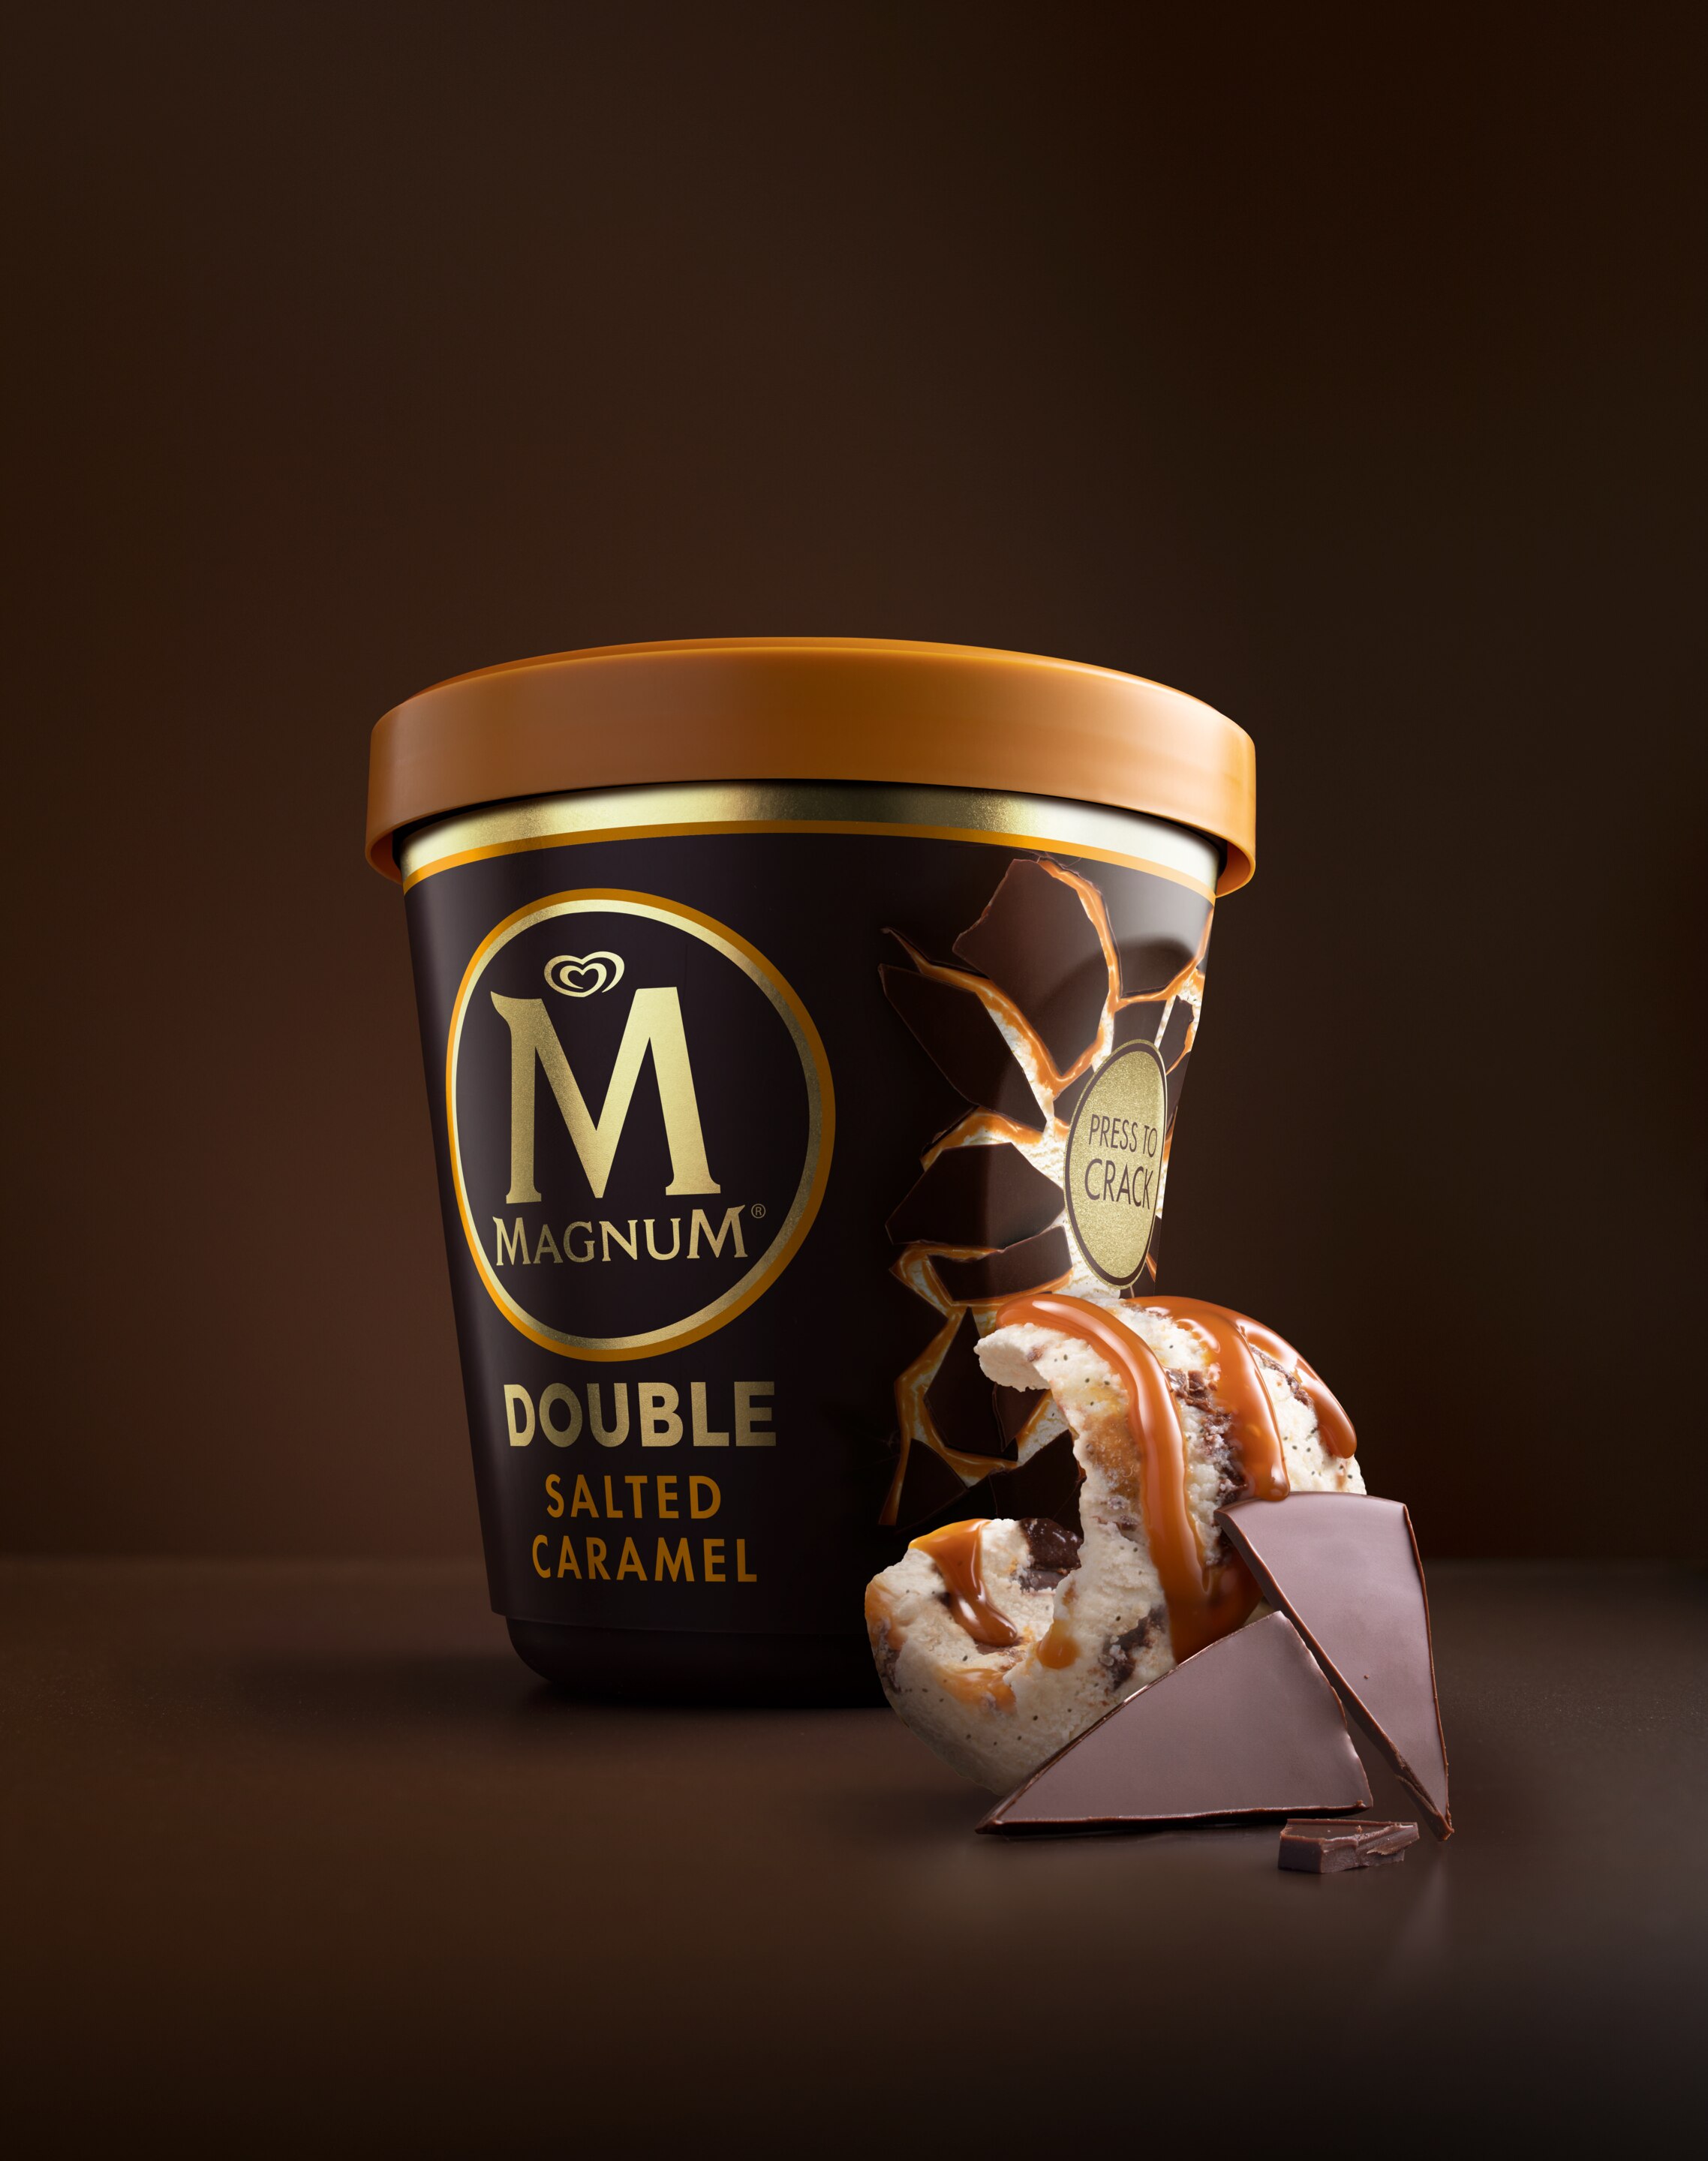 Magnum double salted ice cream image  Text